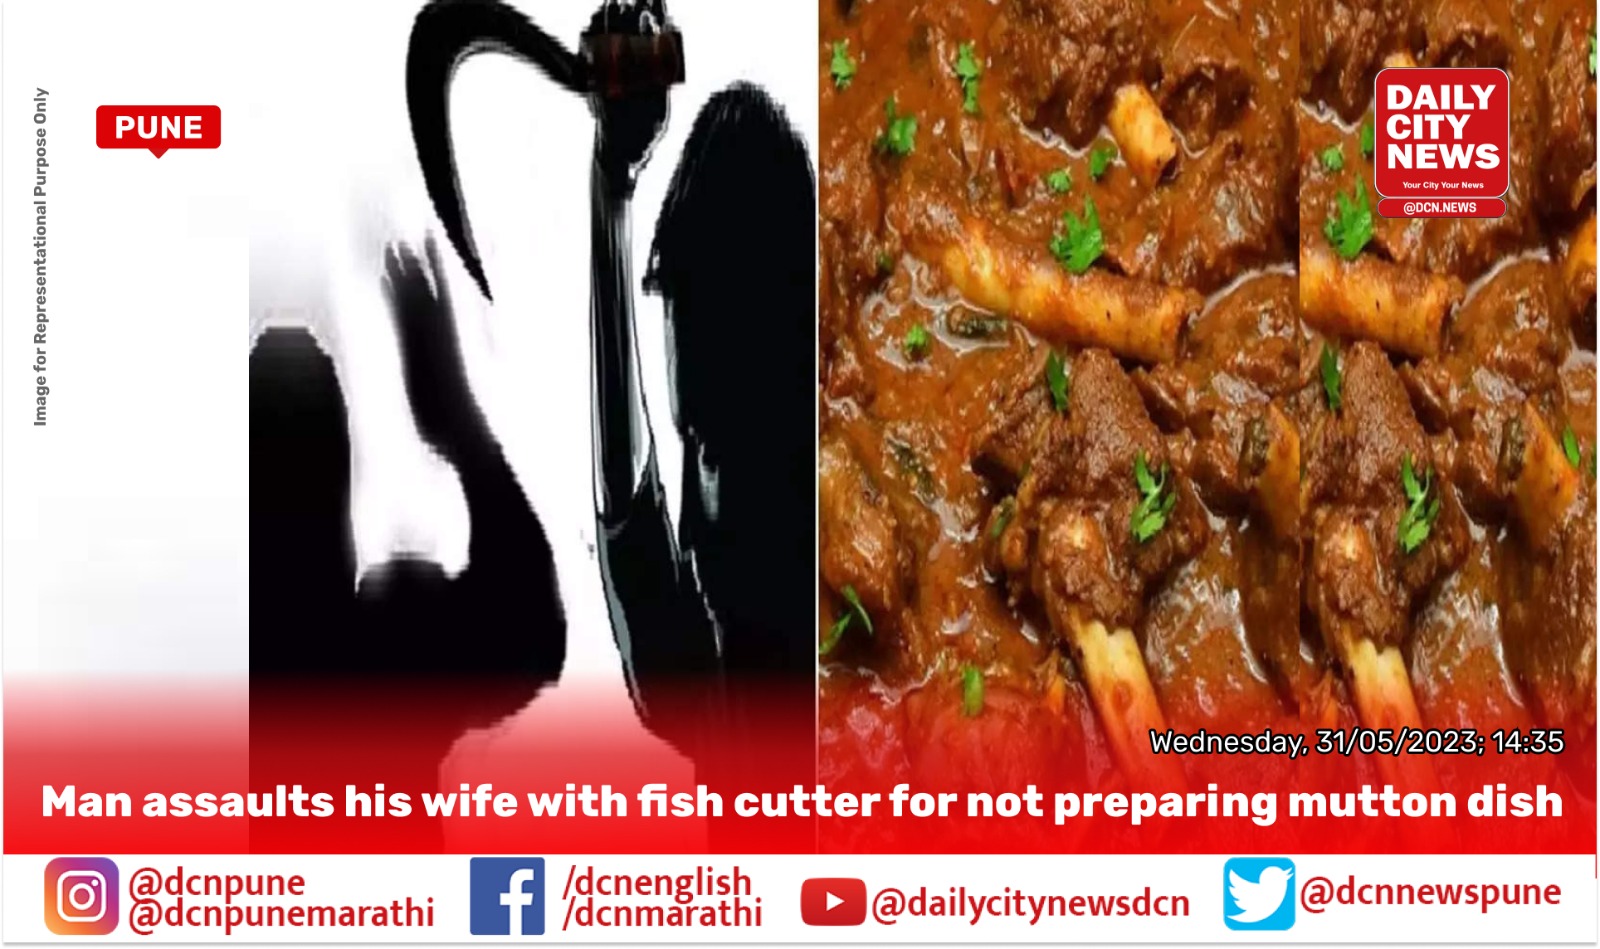 Man assaults his wife with fish cutter for not preparing mutton dish